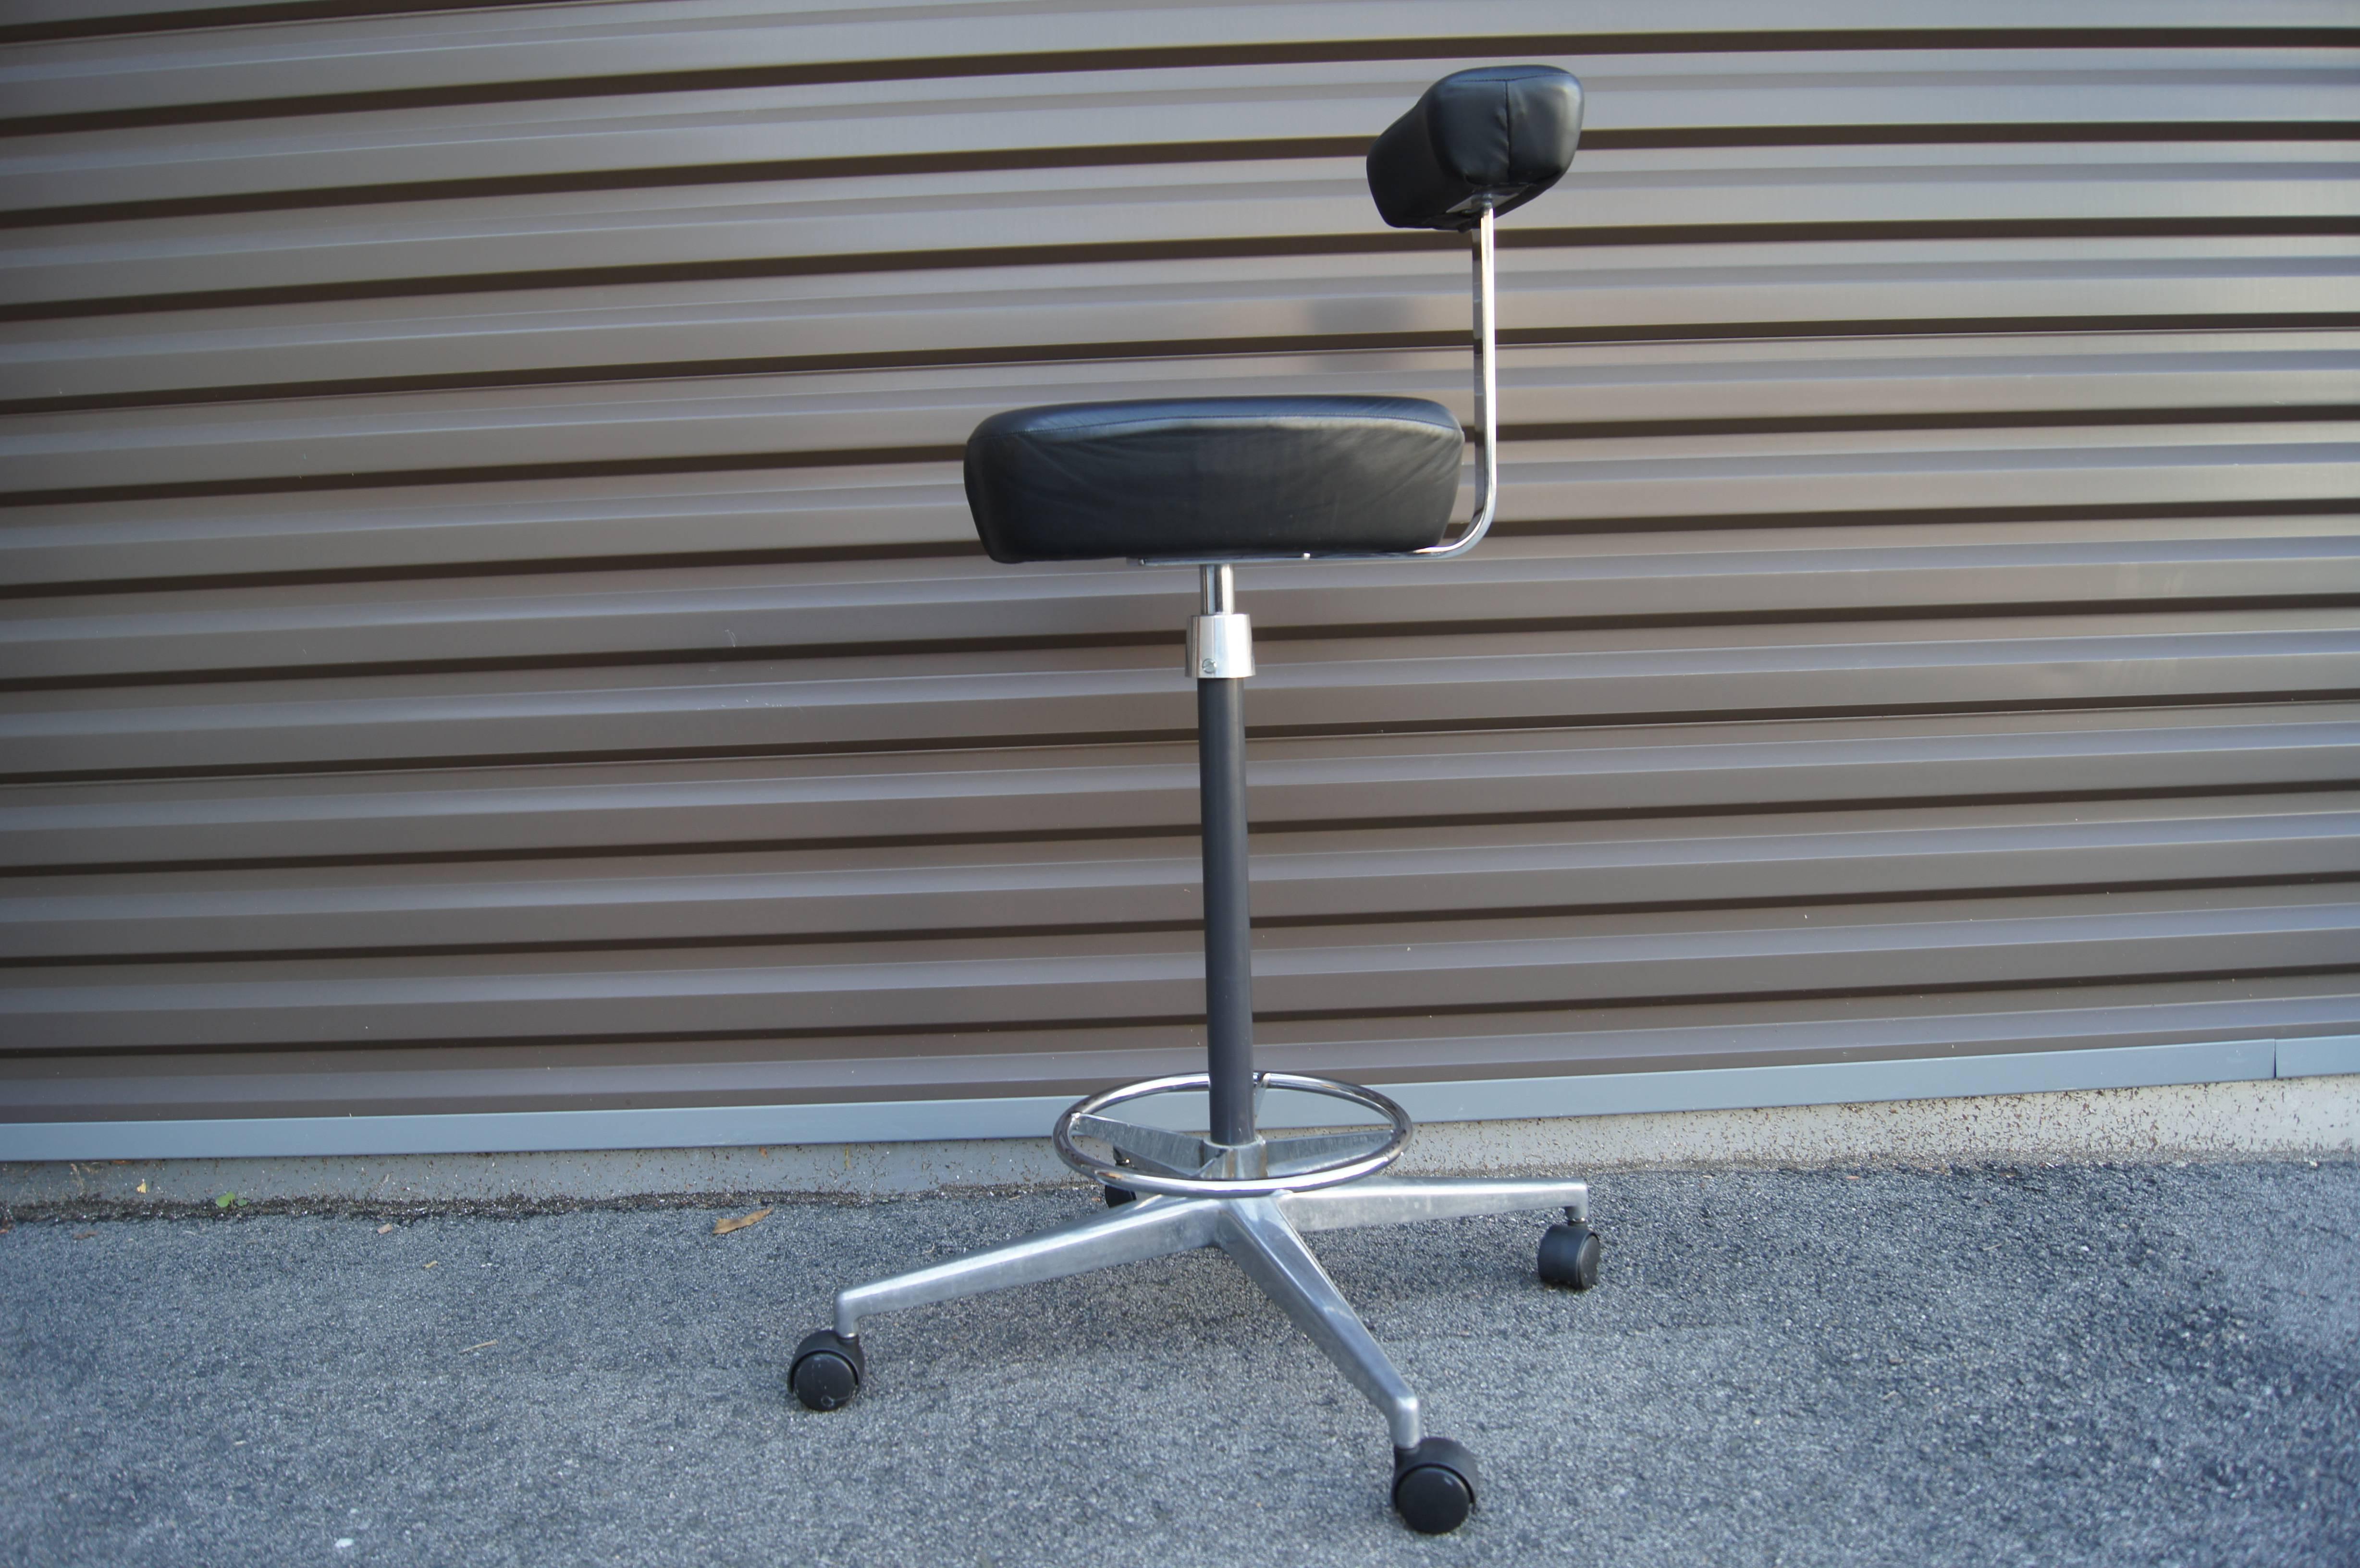 Designed in 1964 by George Nelson and Robert Propst, the Perch Stool was part of Herman Miller's flexible Action Office System. This drafting stool features a chrome-plated frame with a ring footrest and a high seat and small backrest, both